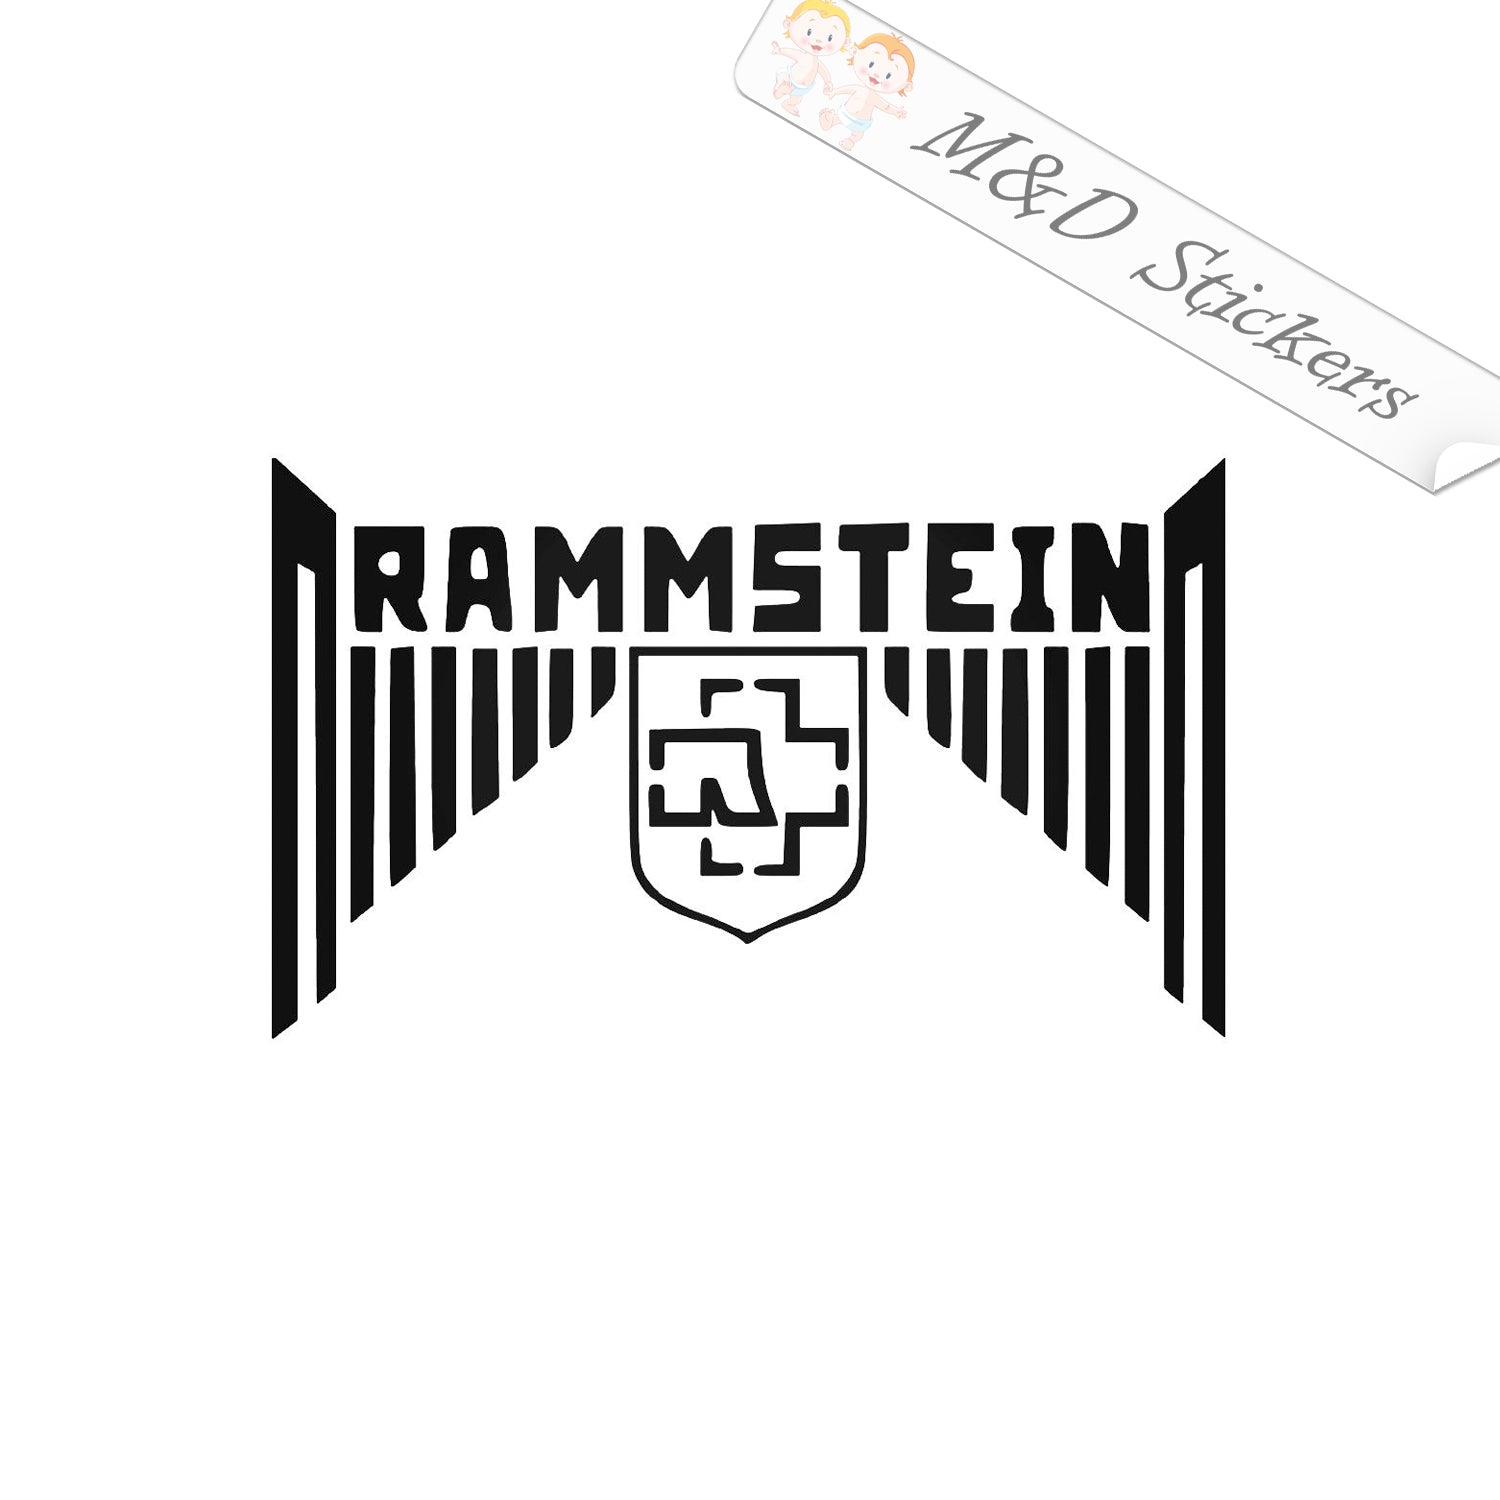 2x Rammstein Logo Vinyl Decal Sticker Different colors & size for